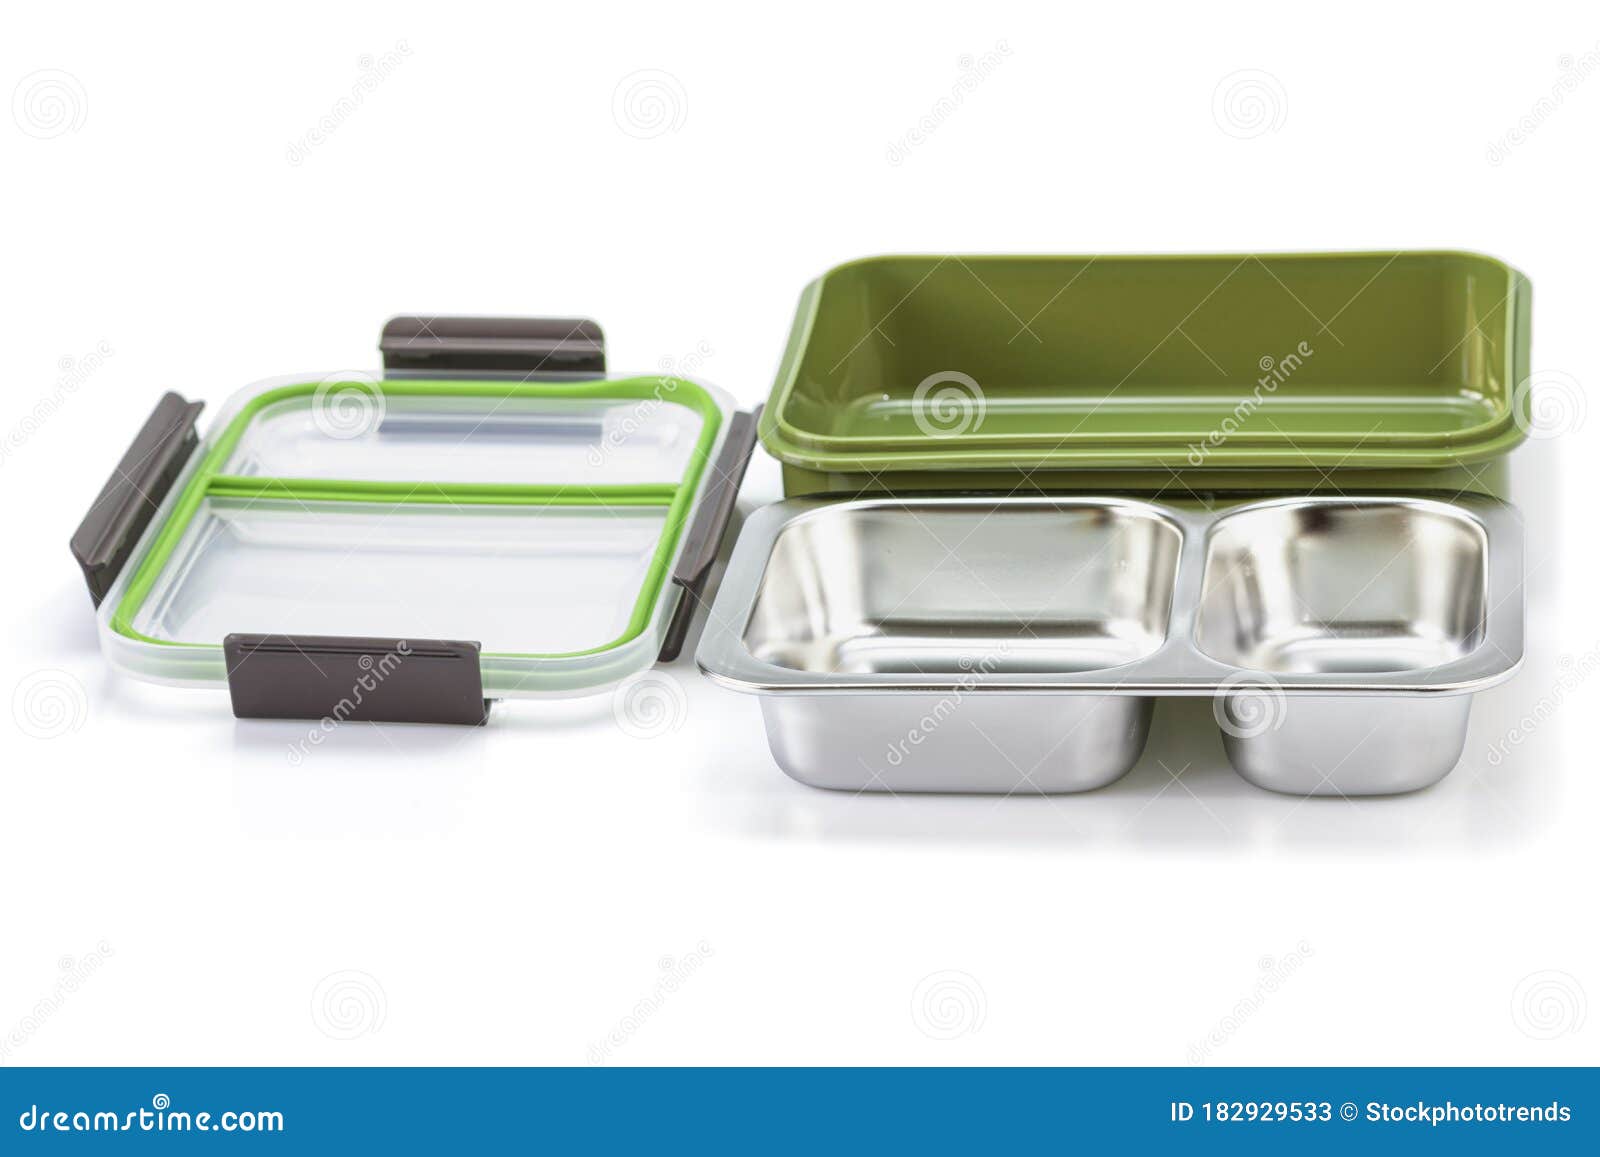 Bagasse Food Container Lunch Box - Eco-Friendly and Sustainable Option for Food Packaging - Shanghai SUNKEA Packaging Co., Ltd.